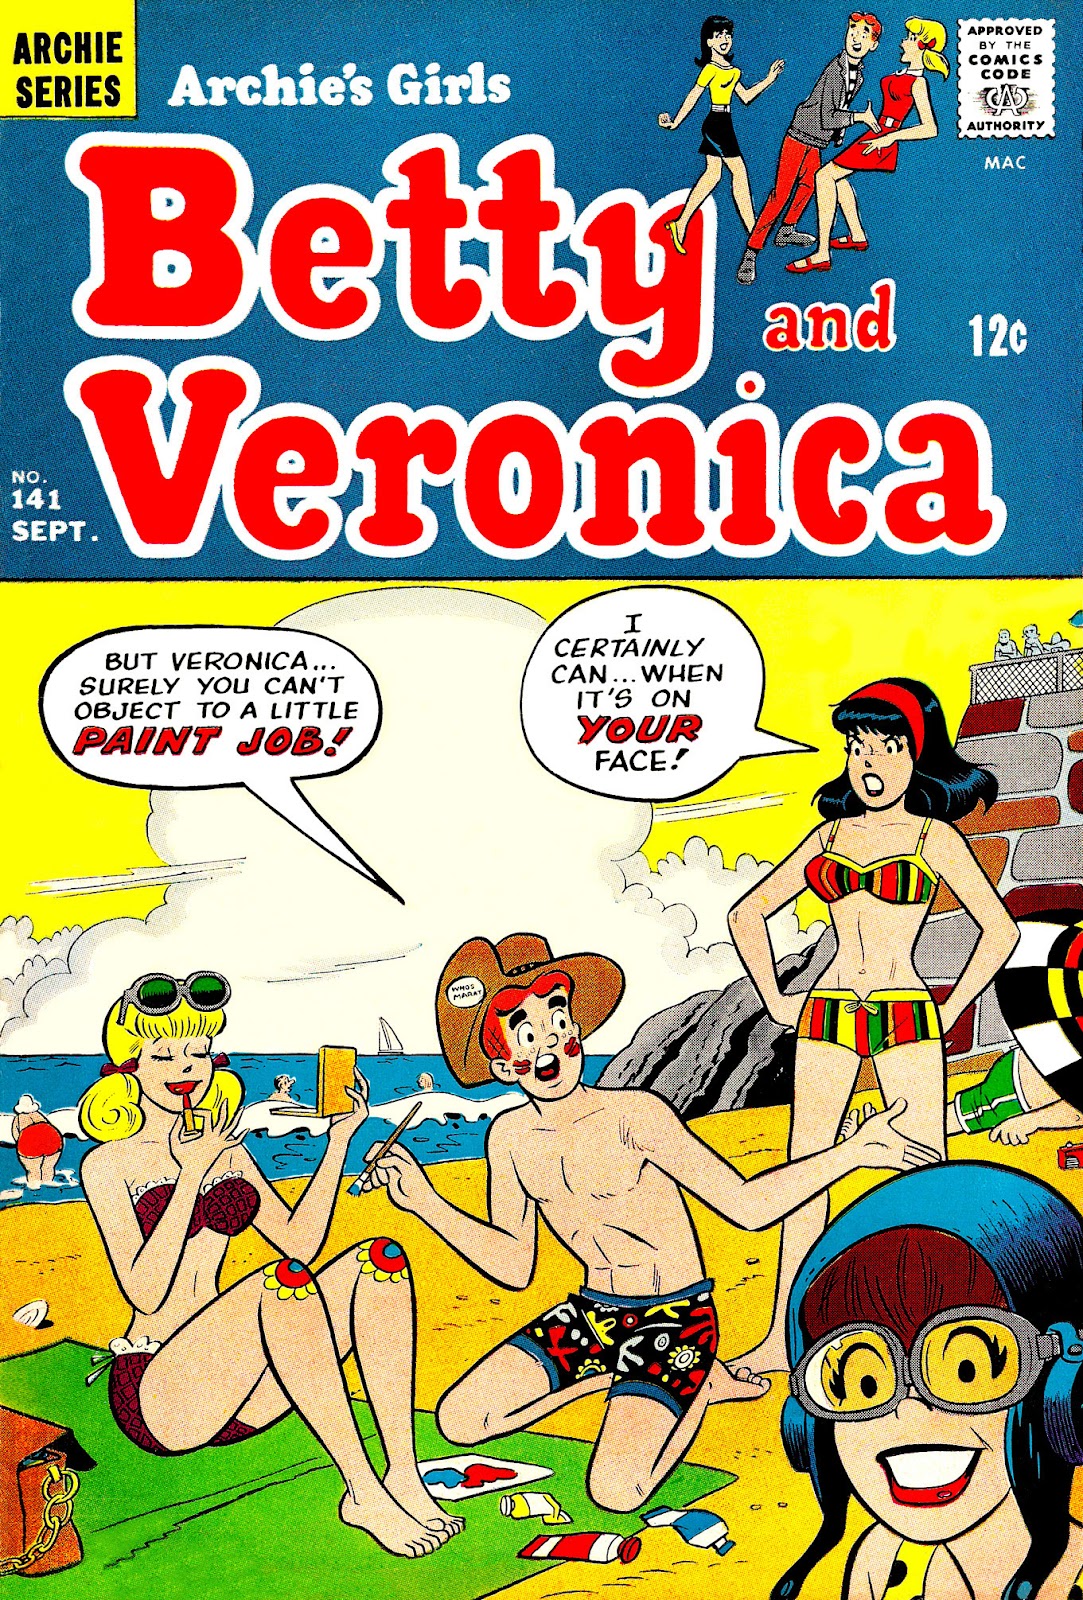 Archie's Girls Betty and Veronica 141 Page 1